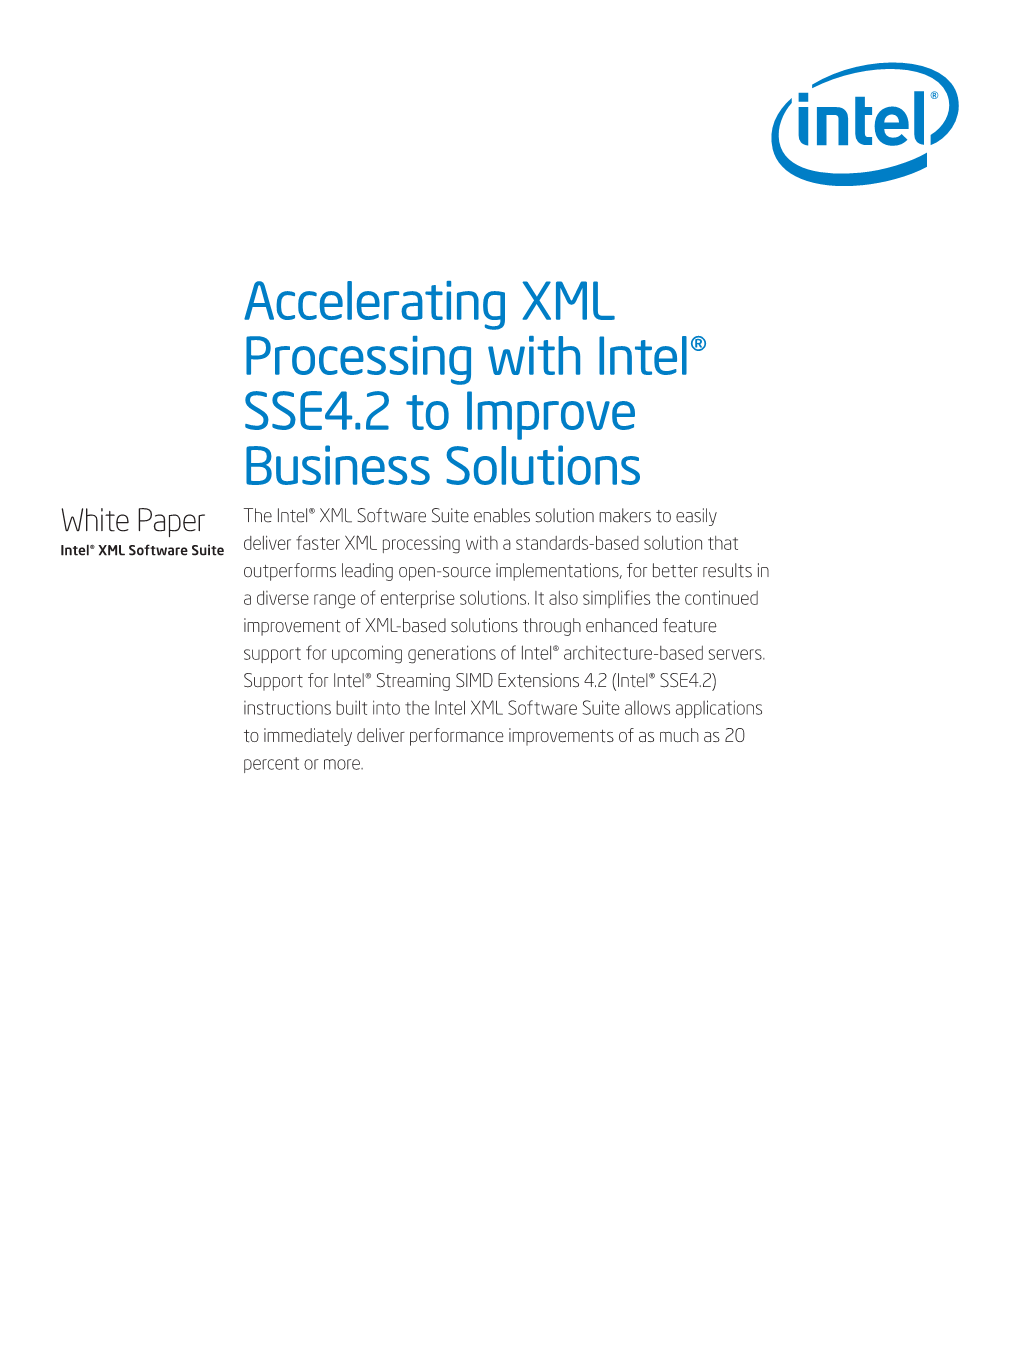 Accelerating XML Processing with Intel® SSE4.2 to Improve Business Solutions